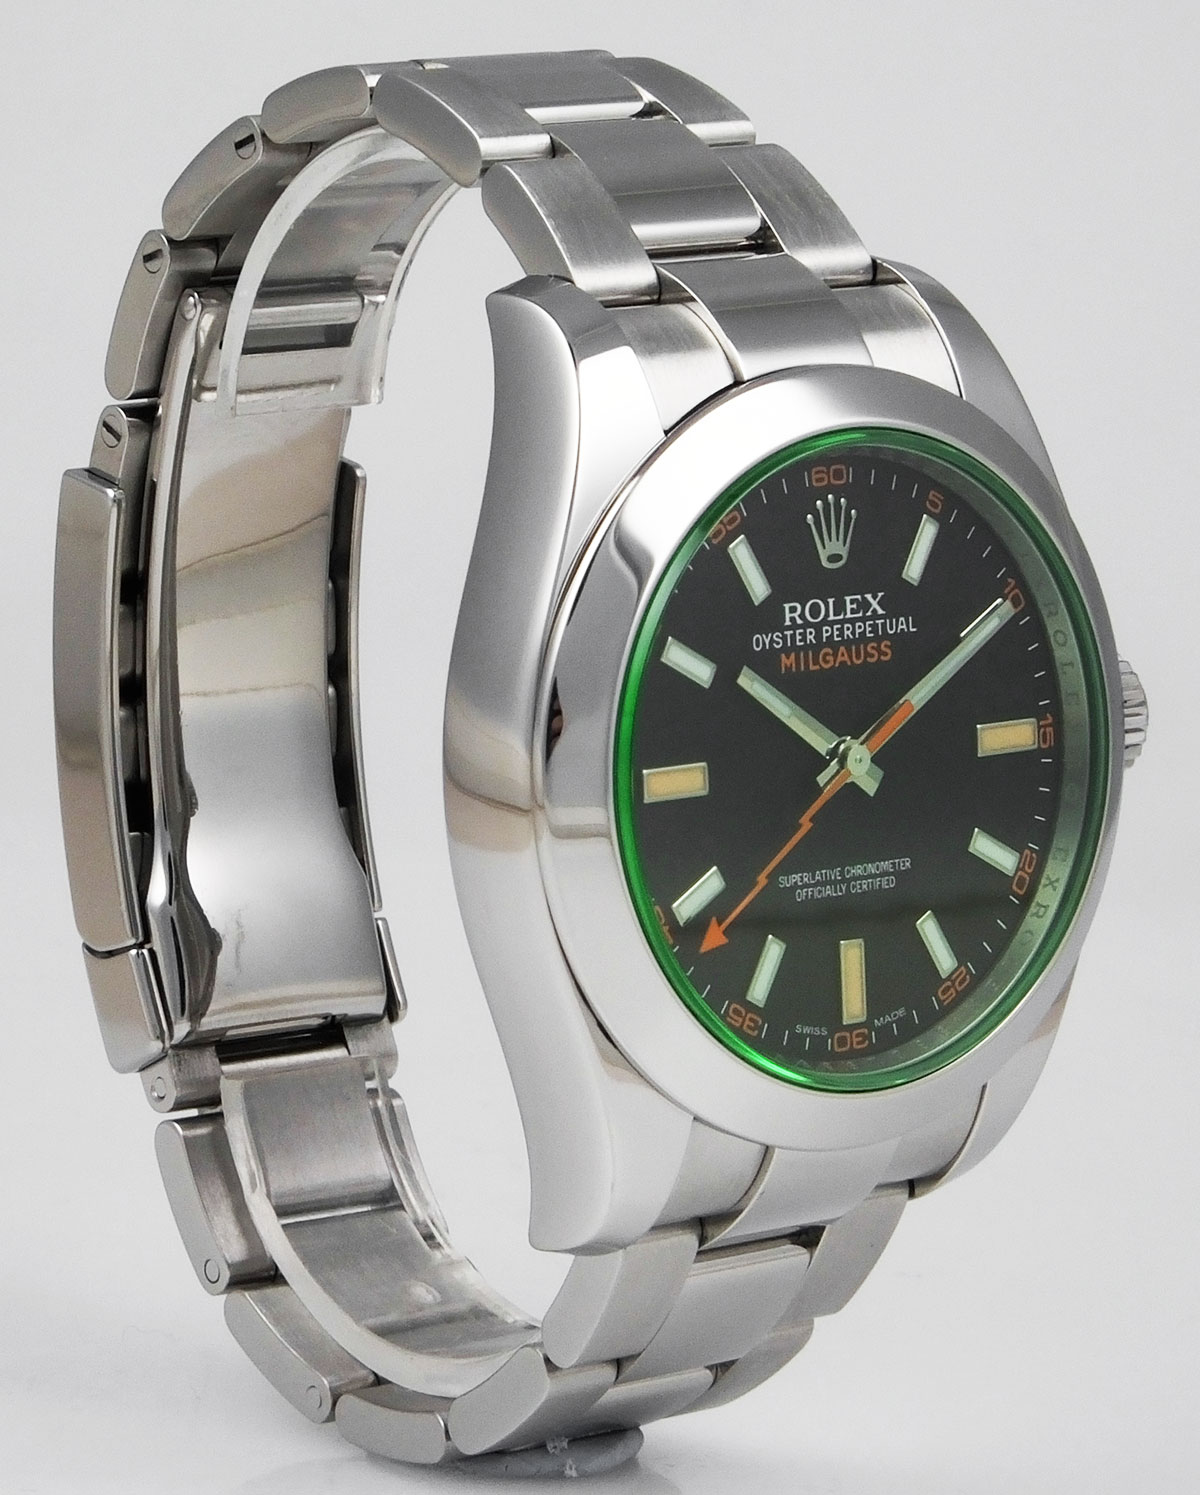 Rolex Oyster Perpetual Milgauss - Black Dial Green Sapphire Crystal ...